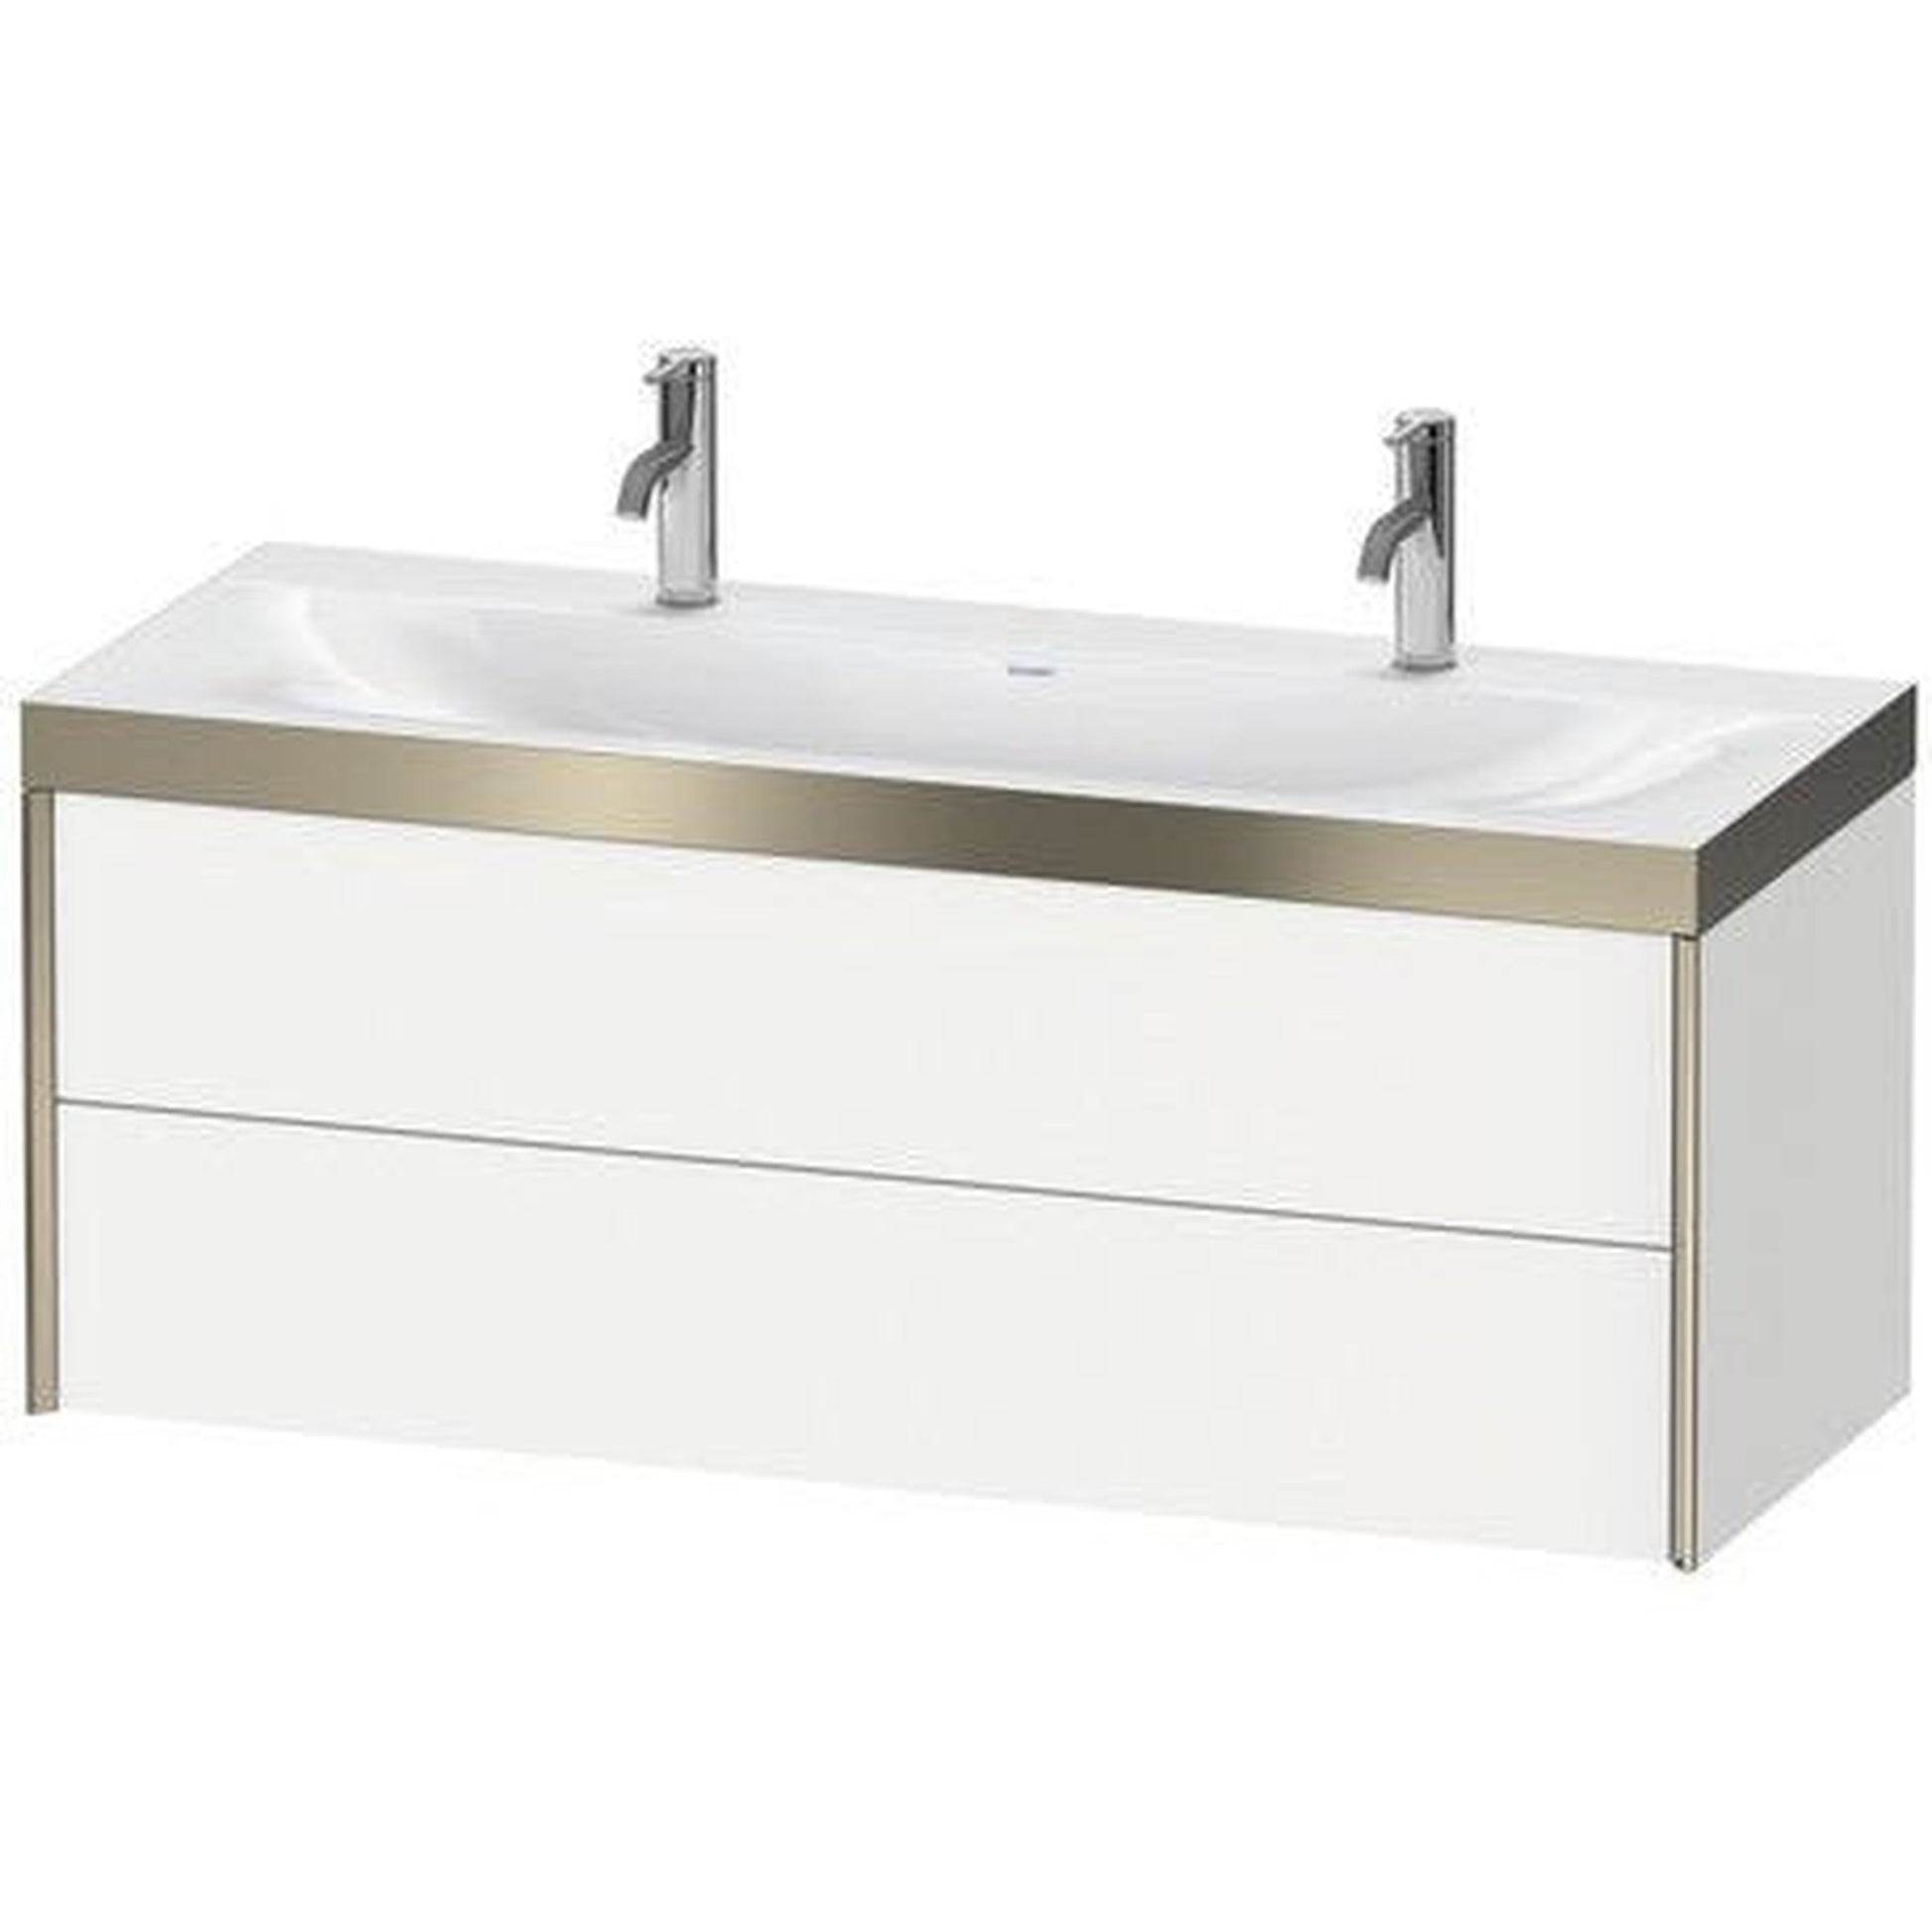 Duravit Xviu 47" x 20" x 19" Two Drawer C-Bonded Wall-Mount Vanity Kit With One Tap Hole, Flannel Gray (XV4618OB190C)